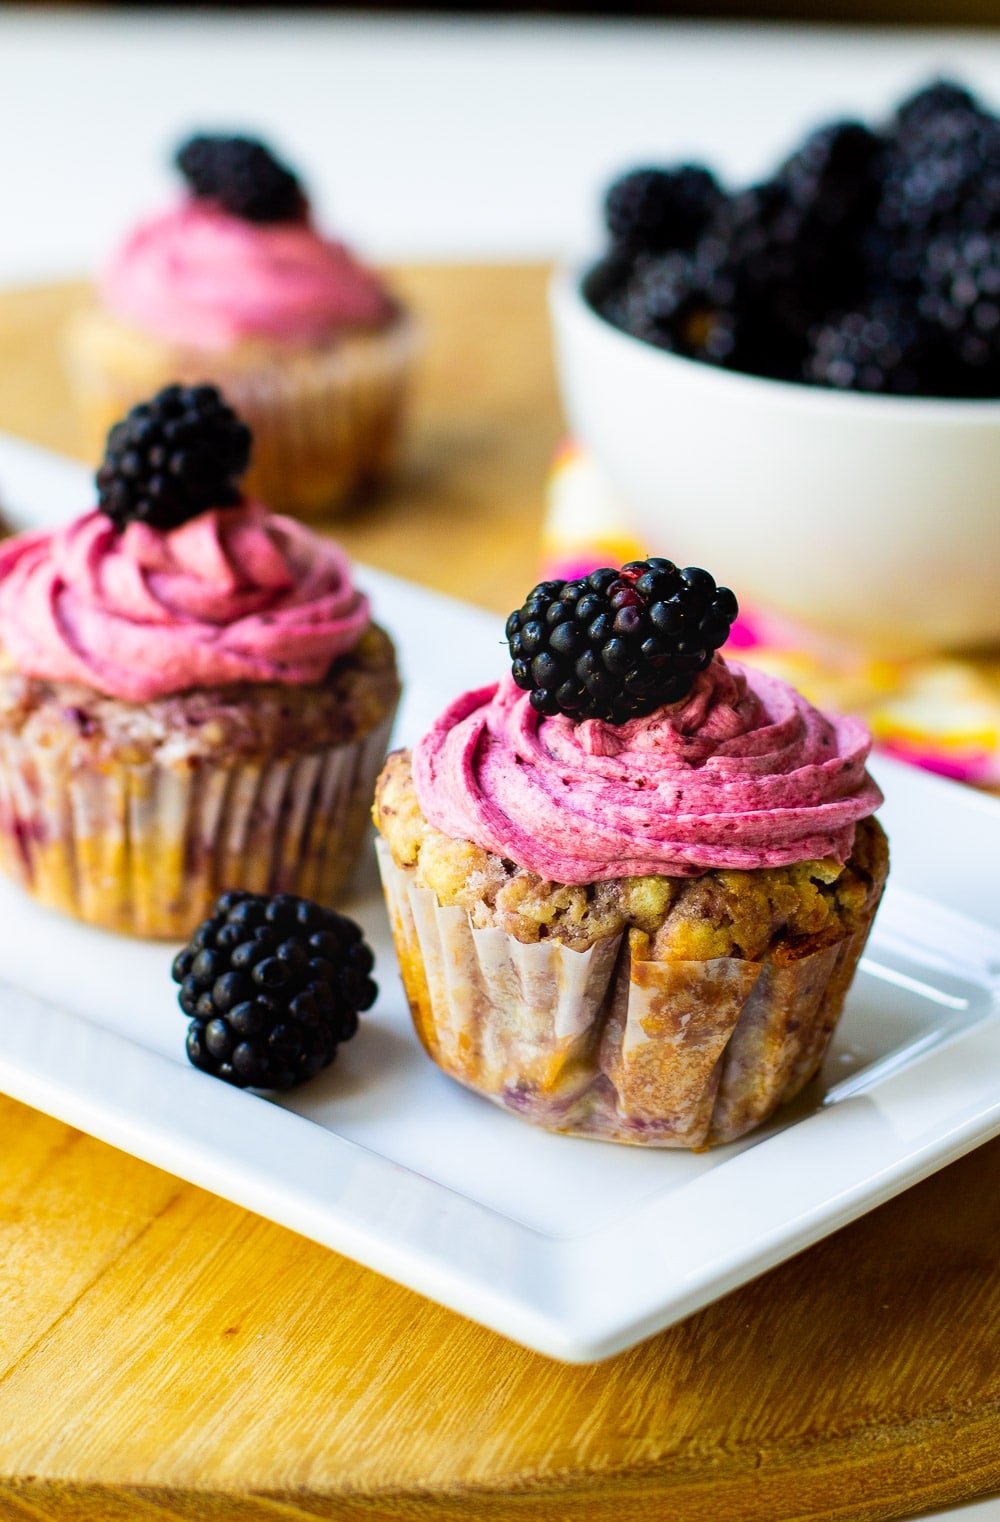 Cupcakes with Blackberries with a bowl of blackberries in background.